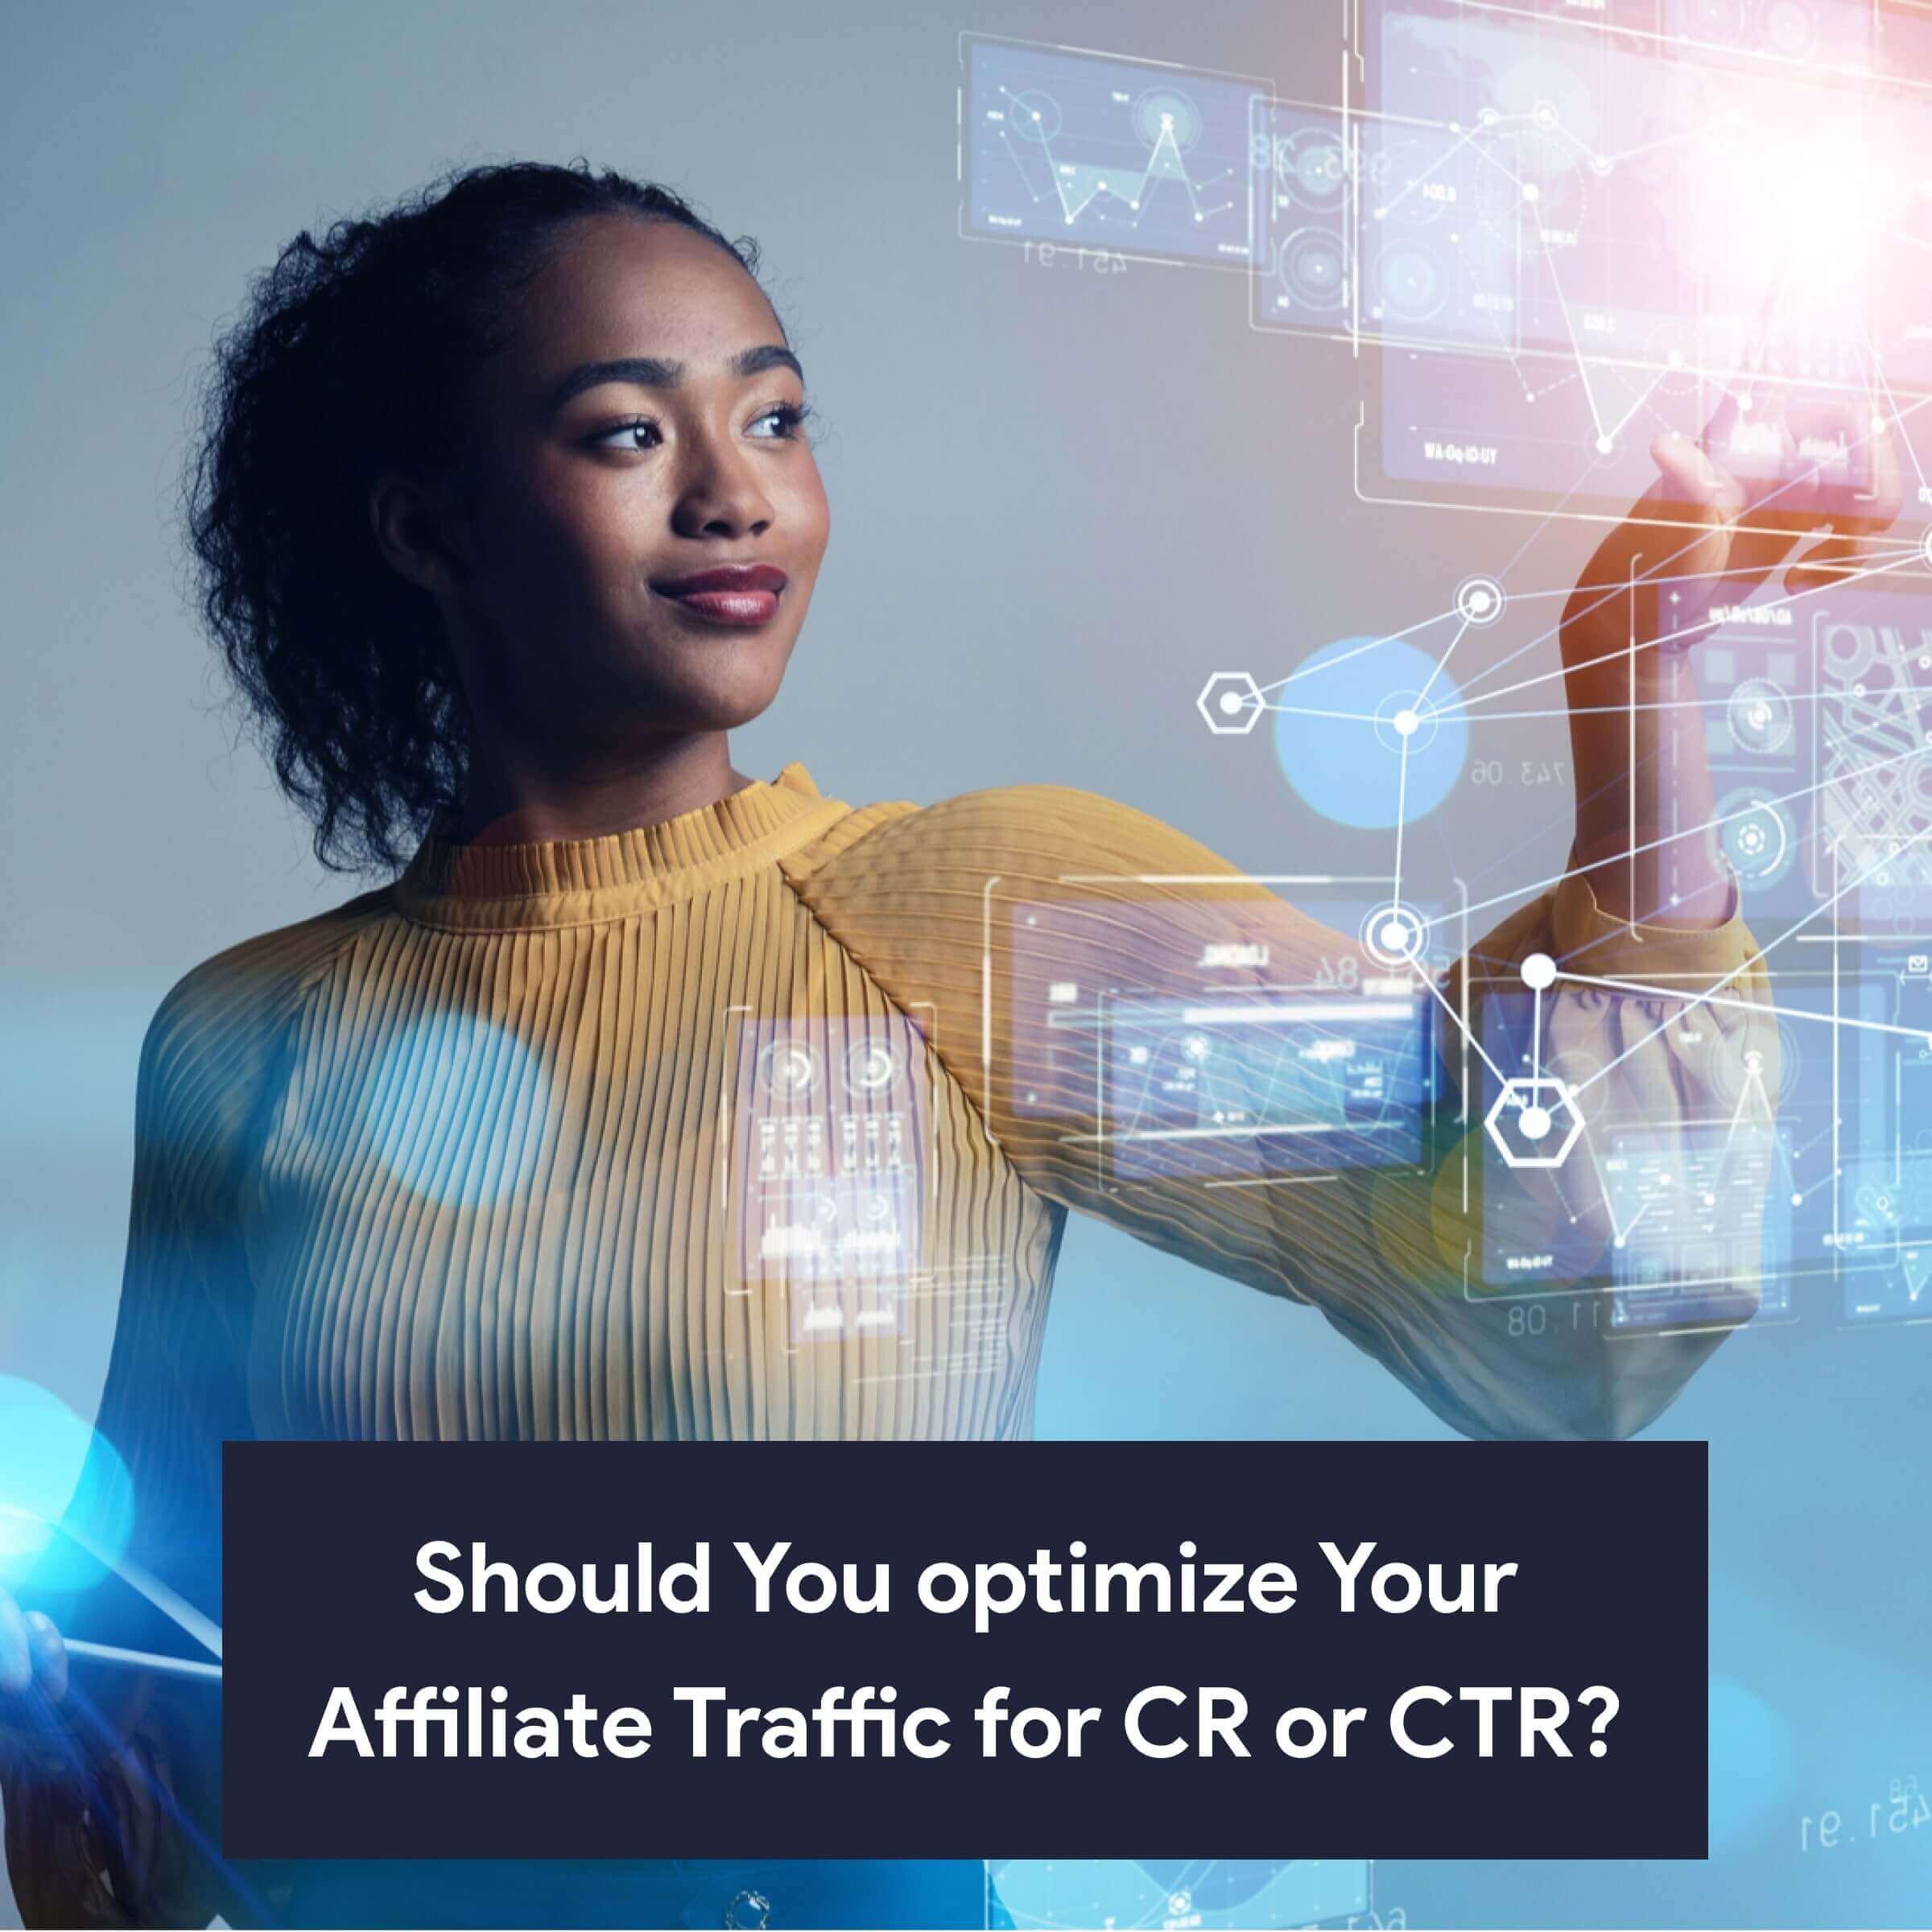 eBook - Should You optimize Your Affiliate Traffic for CR or CTR?